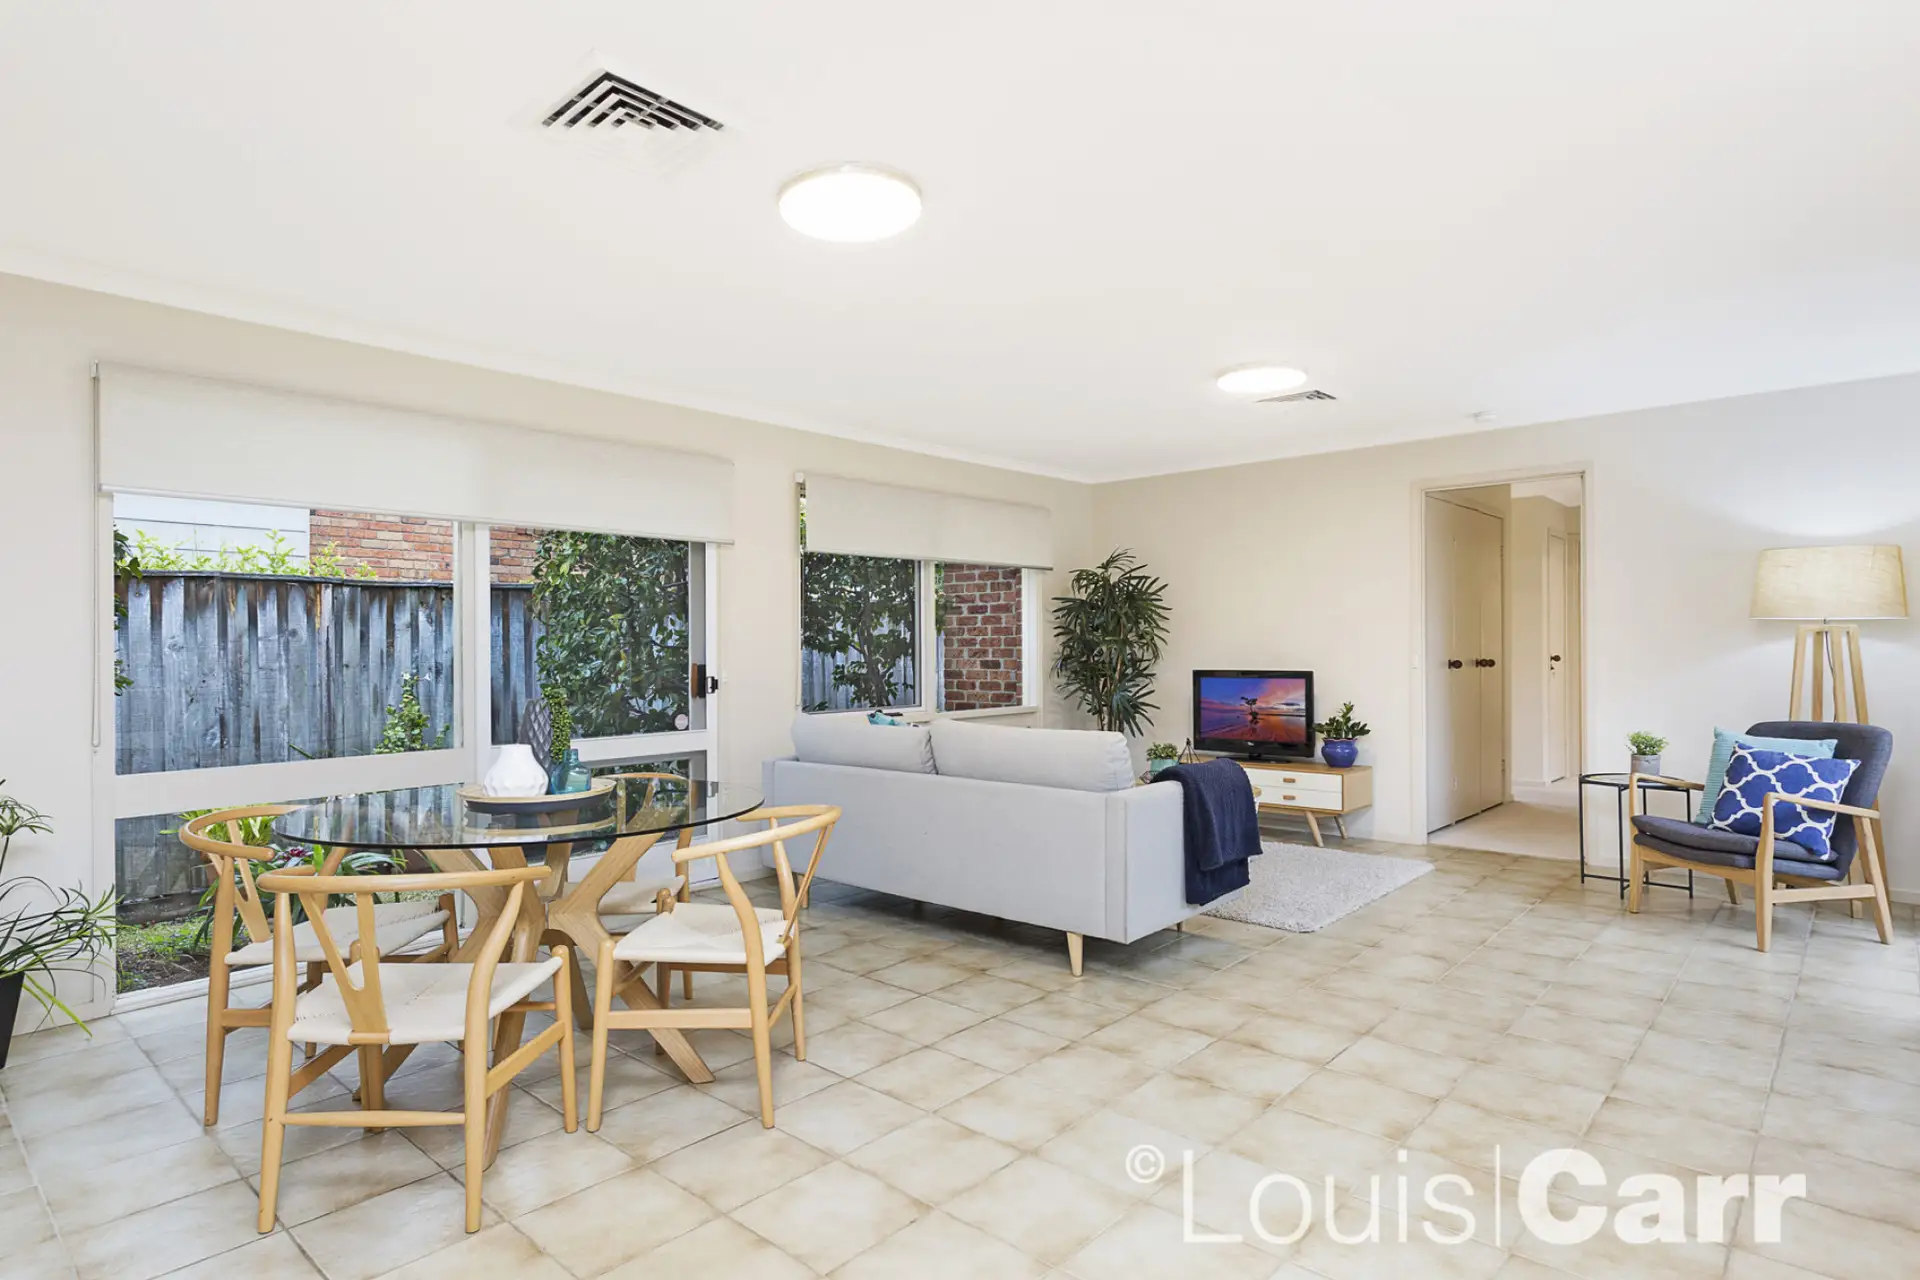 Photo #3: 9 Pogson Drive, Cherrybrook - Sold by Louis Carr Real Estate